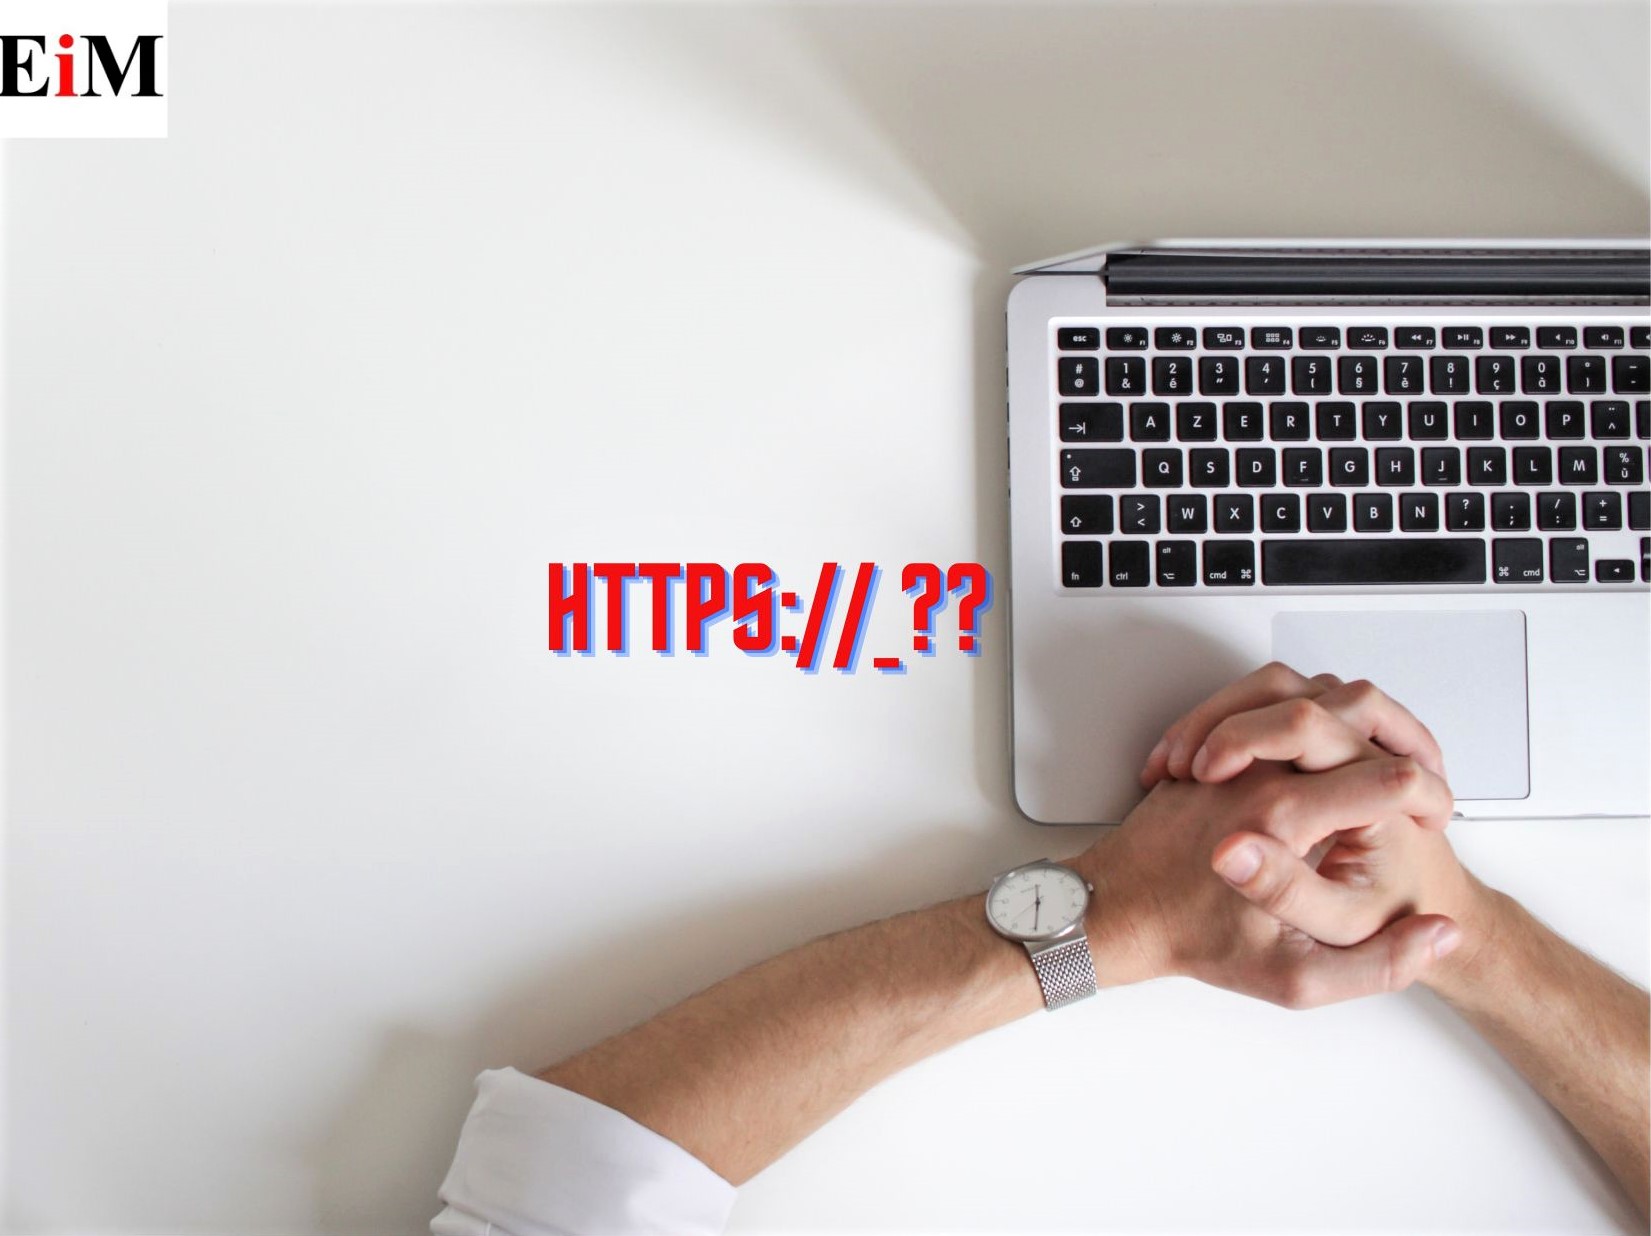 How Can You Tell If a URL Is Safe to Use?